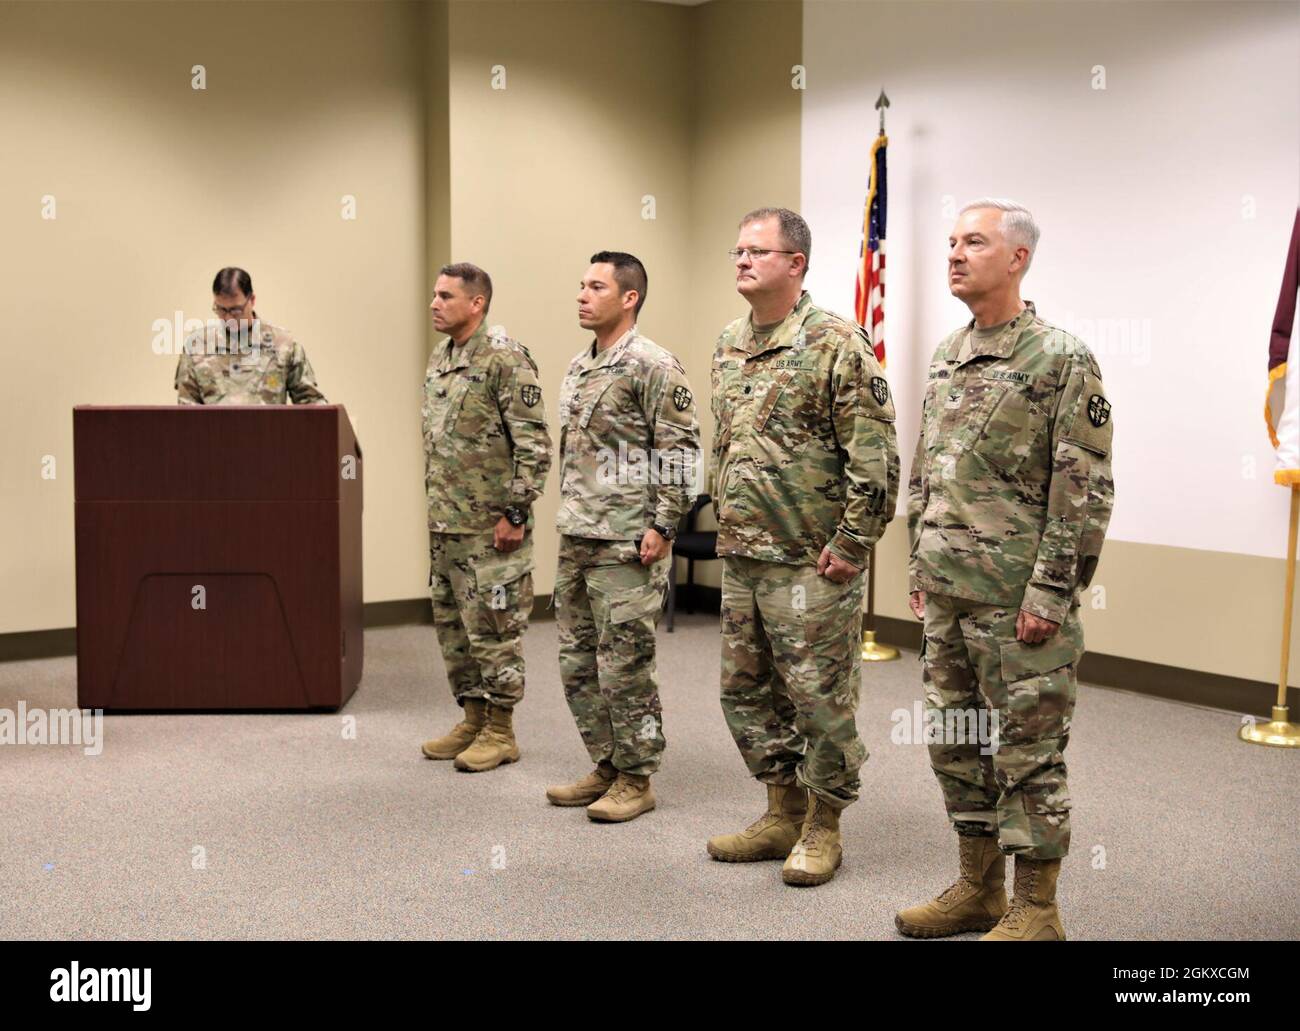 From right, Col. Gerald Hautman, Lt. Col. Michael Moyle, Sgt. 1st Class  Andrew Diaz of 7302nd Medical Training Support Battalion, and Col. Carlos  Tamez, 3rd Medical Training Brigade commander, stand in formation